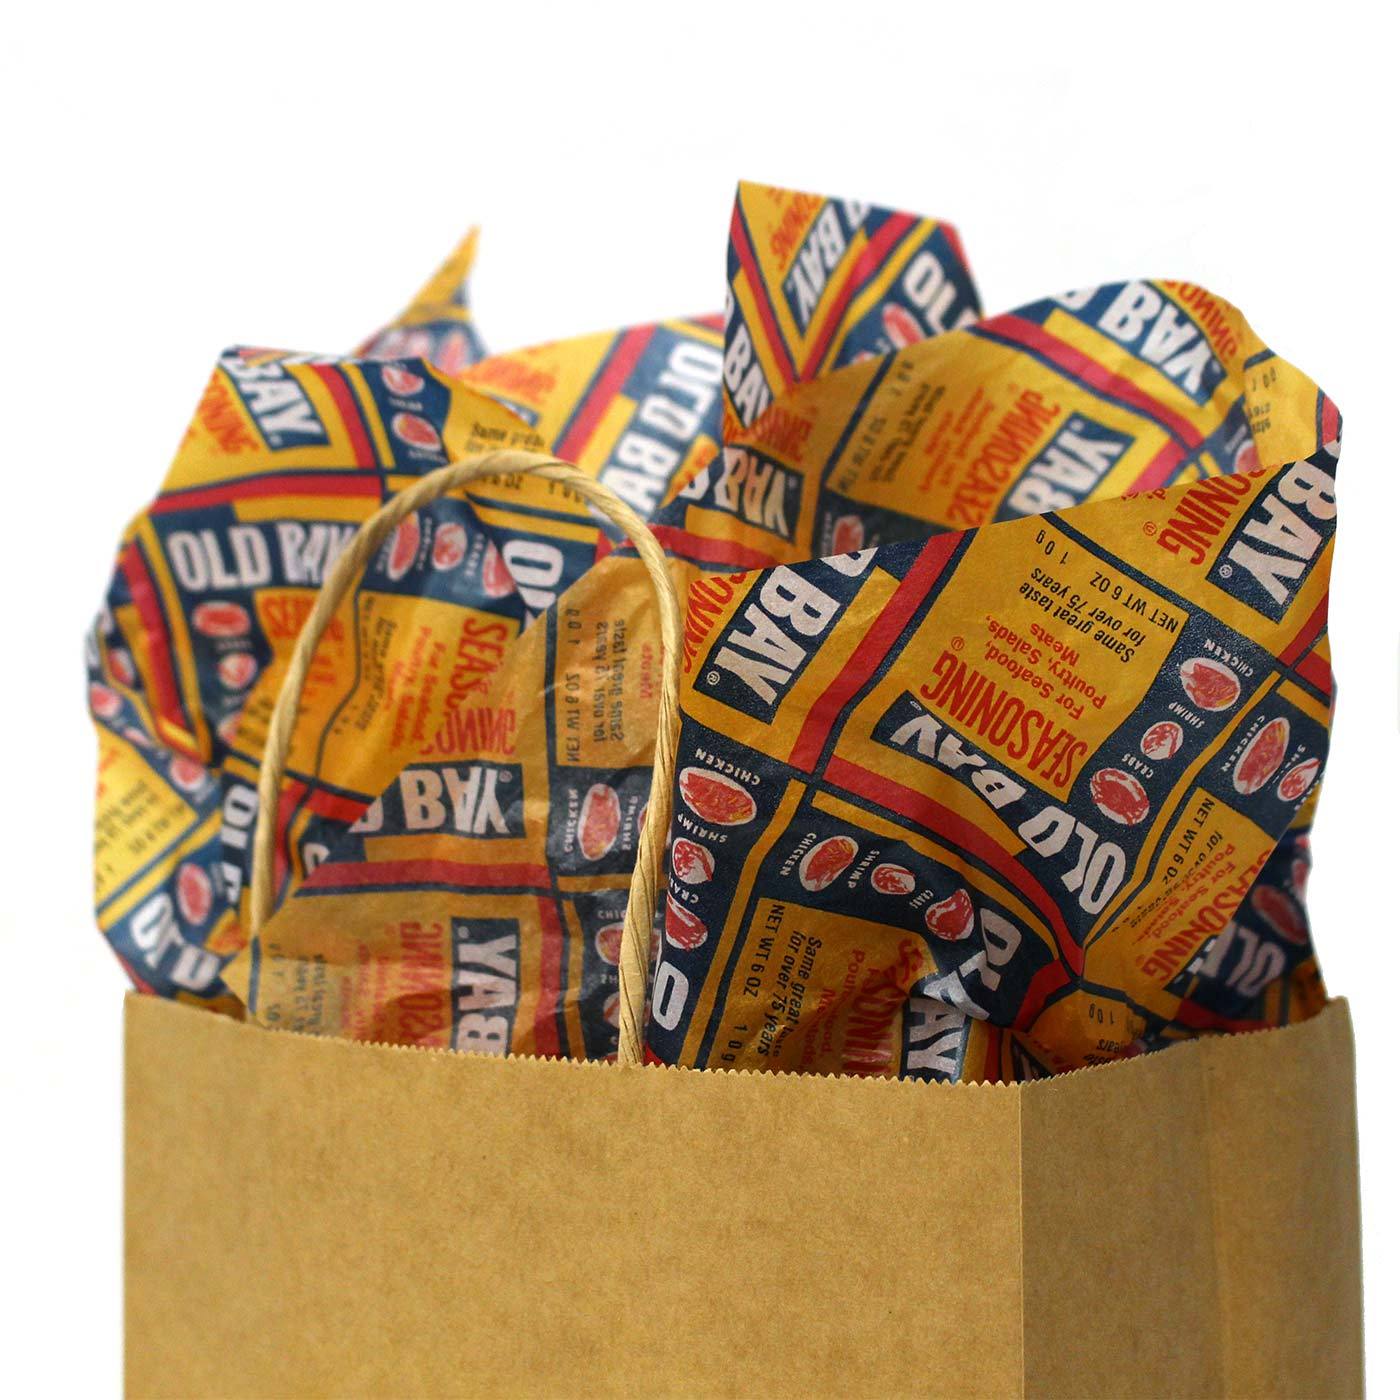 Flat Old Bay Can Pattern / Tissue Paper Pack - Route One Apparel